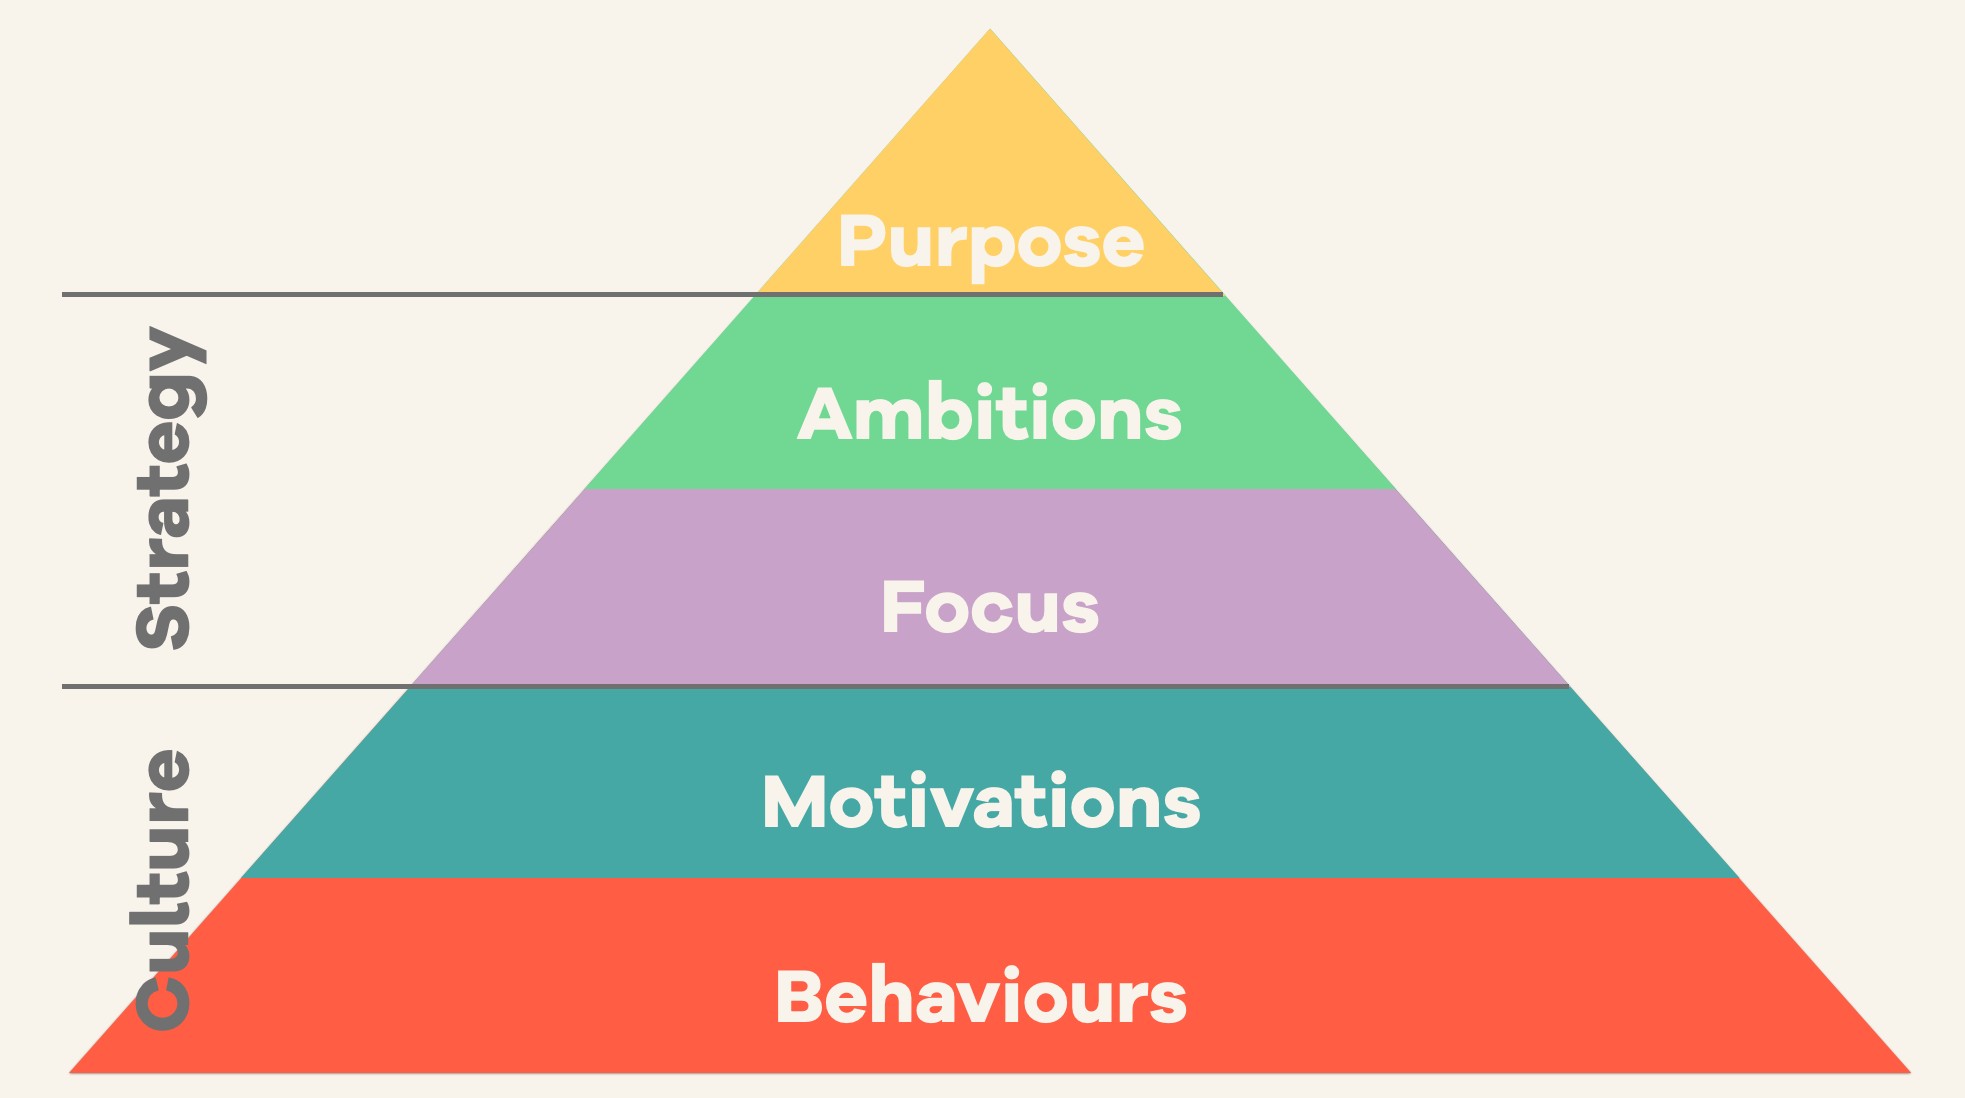 A pyramid with 5 layers showing from top to bottom, Purpose, Ambitions, Focus, Motivations, Behaviours